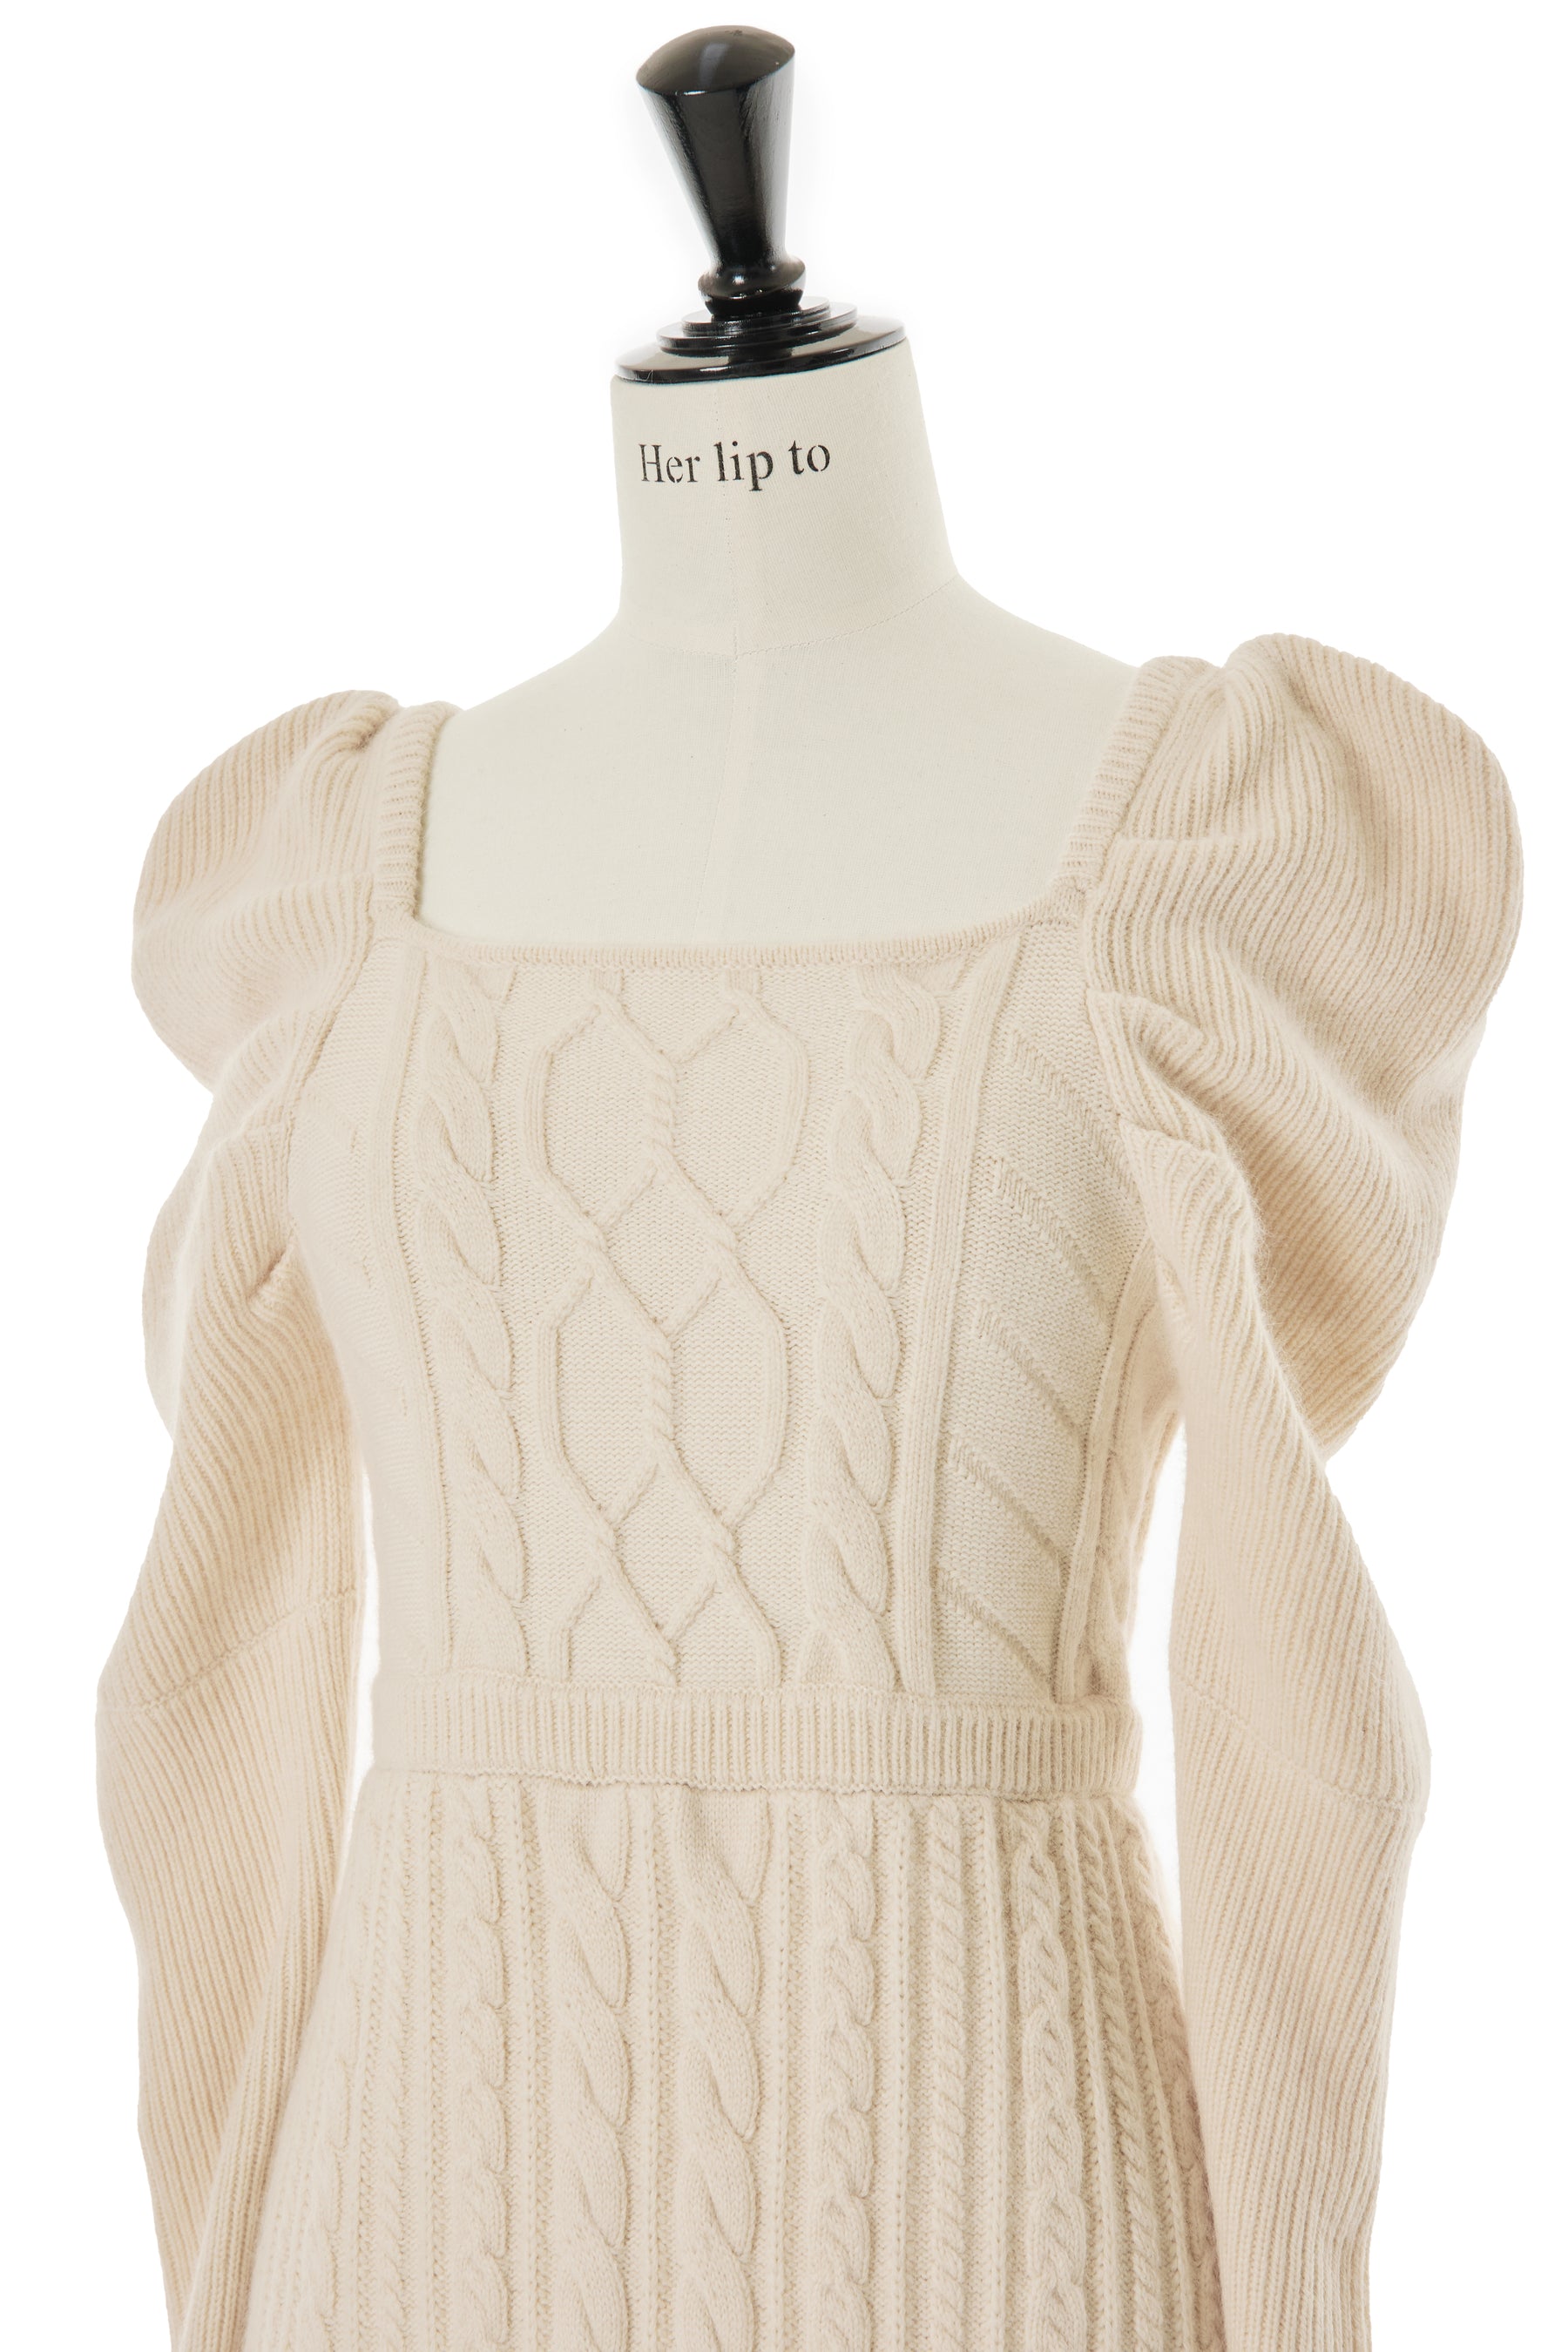 Bambina Cable Knit Dress / Her lip toポリエステル100%